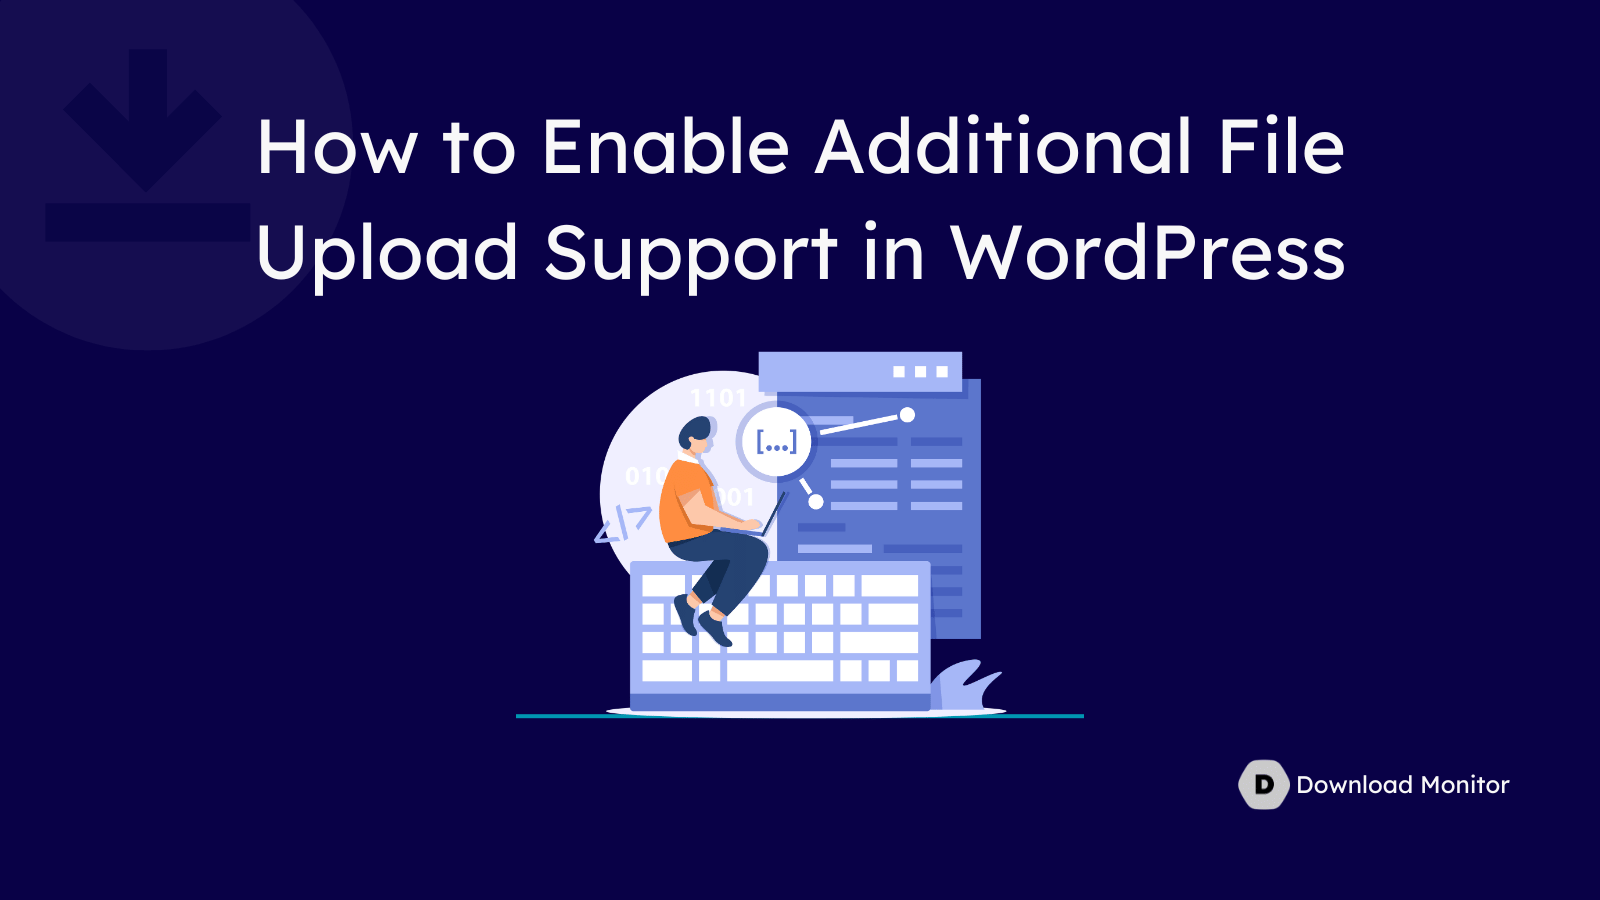 How to Enable Additional File Upload Support in WordPress